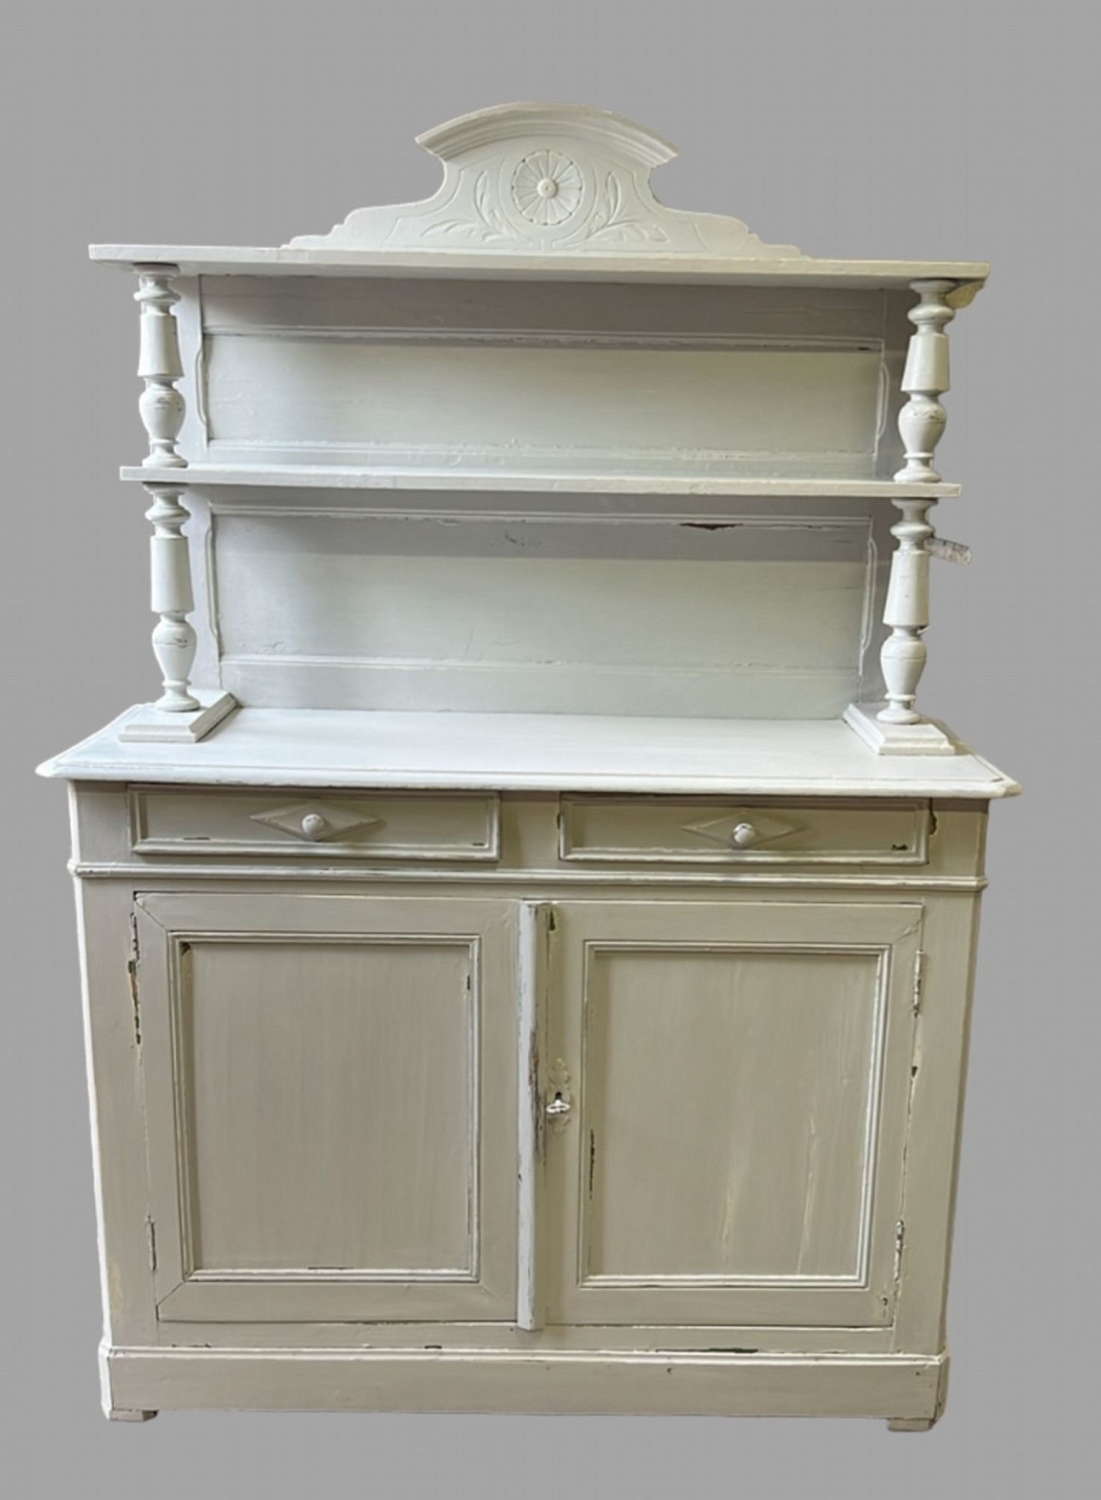 A 19thc Painted Distressed French Pine Dresser